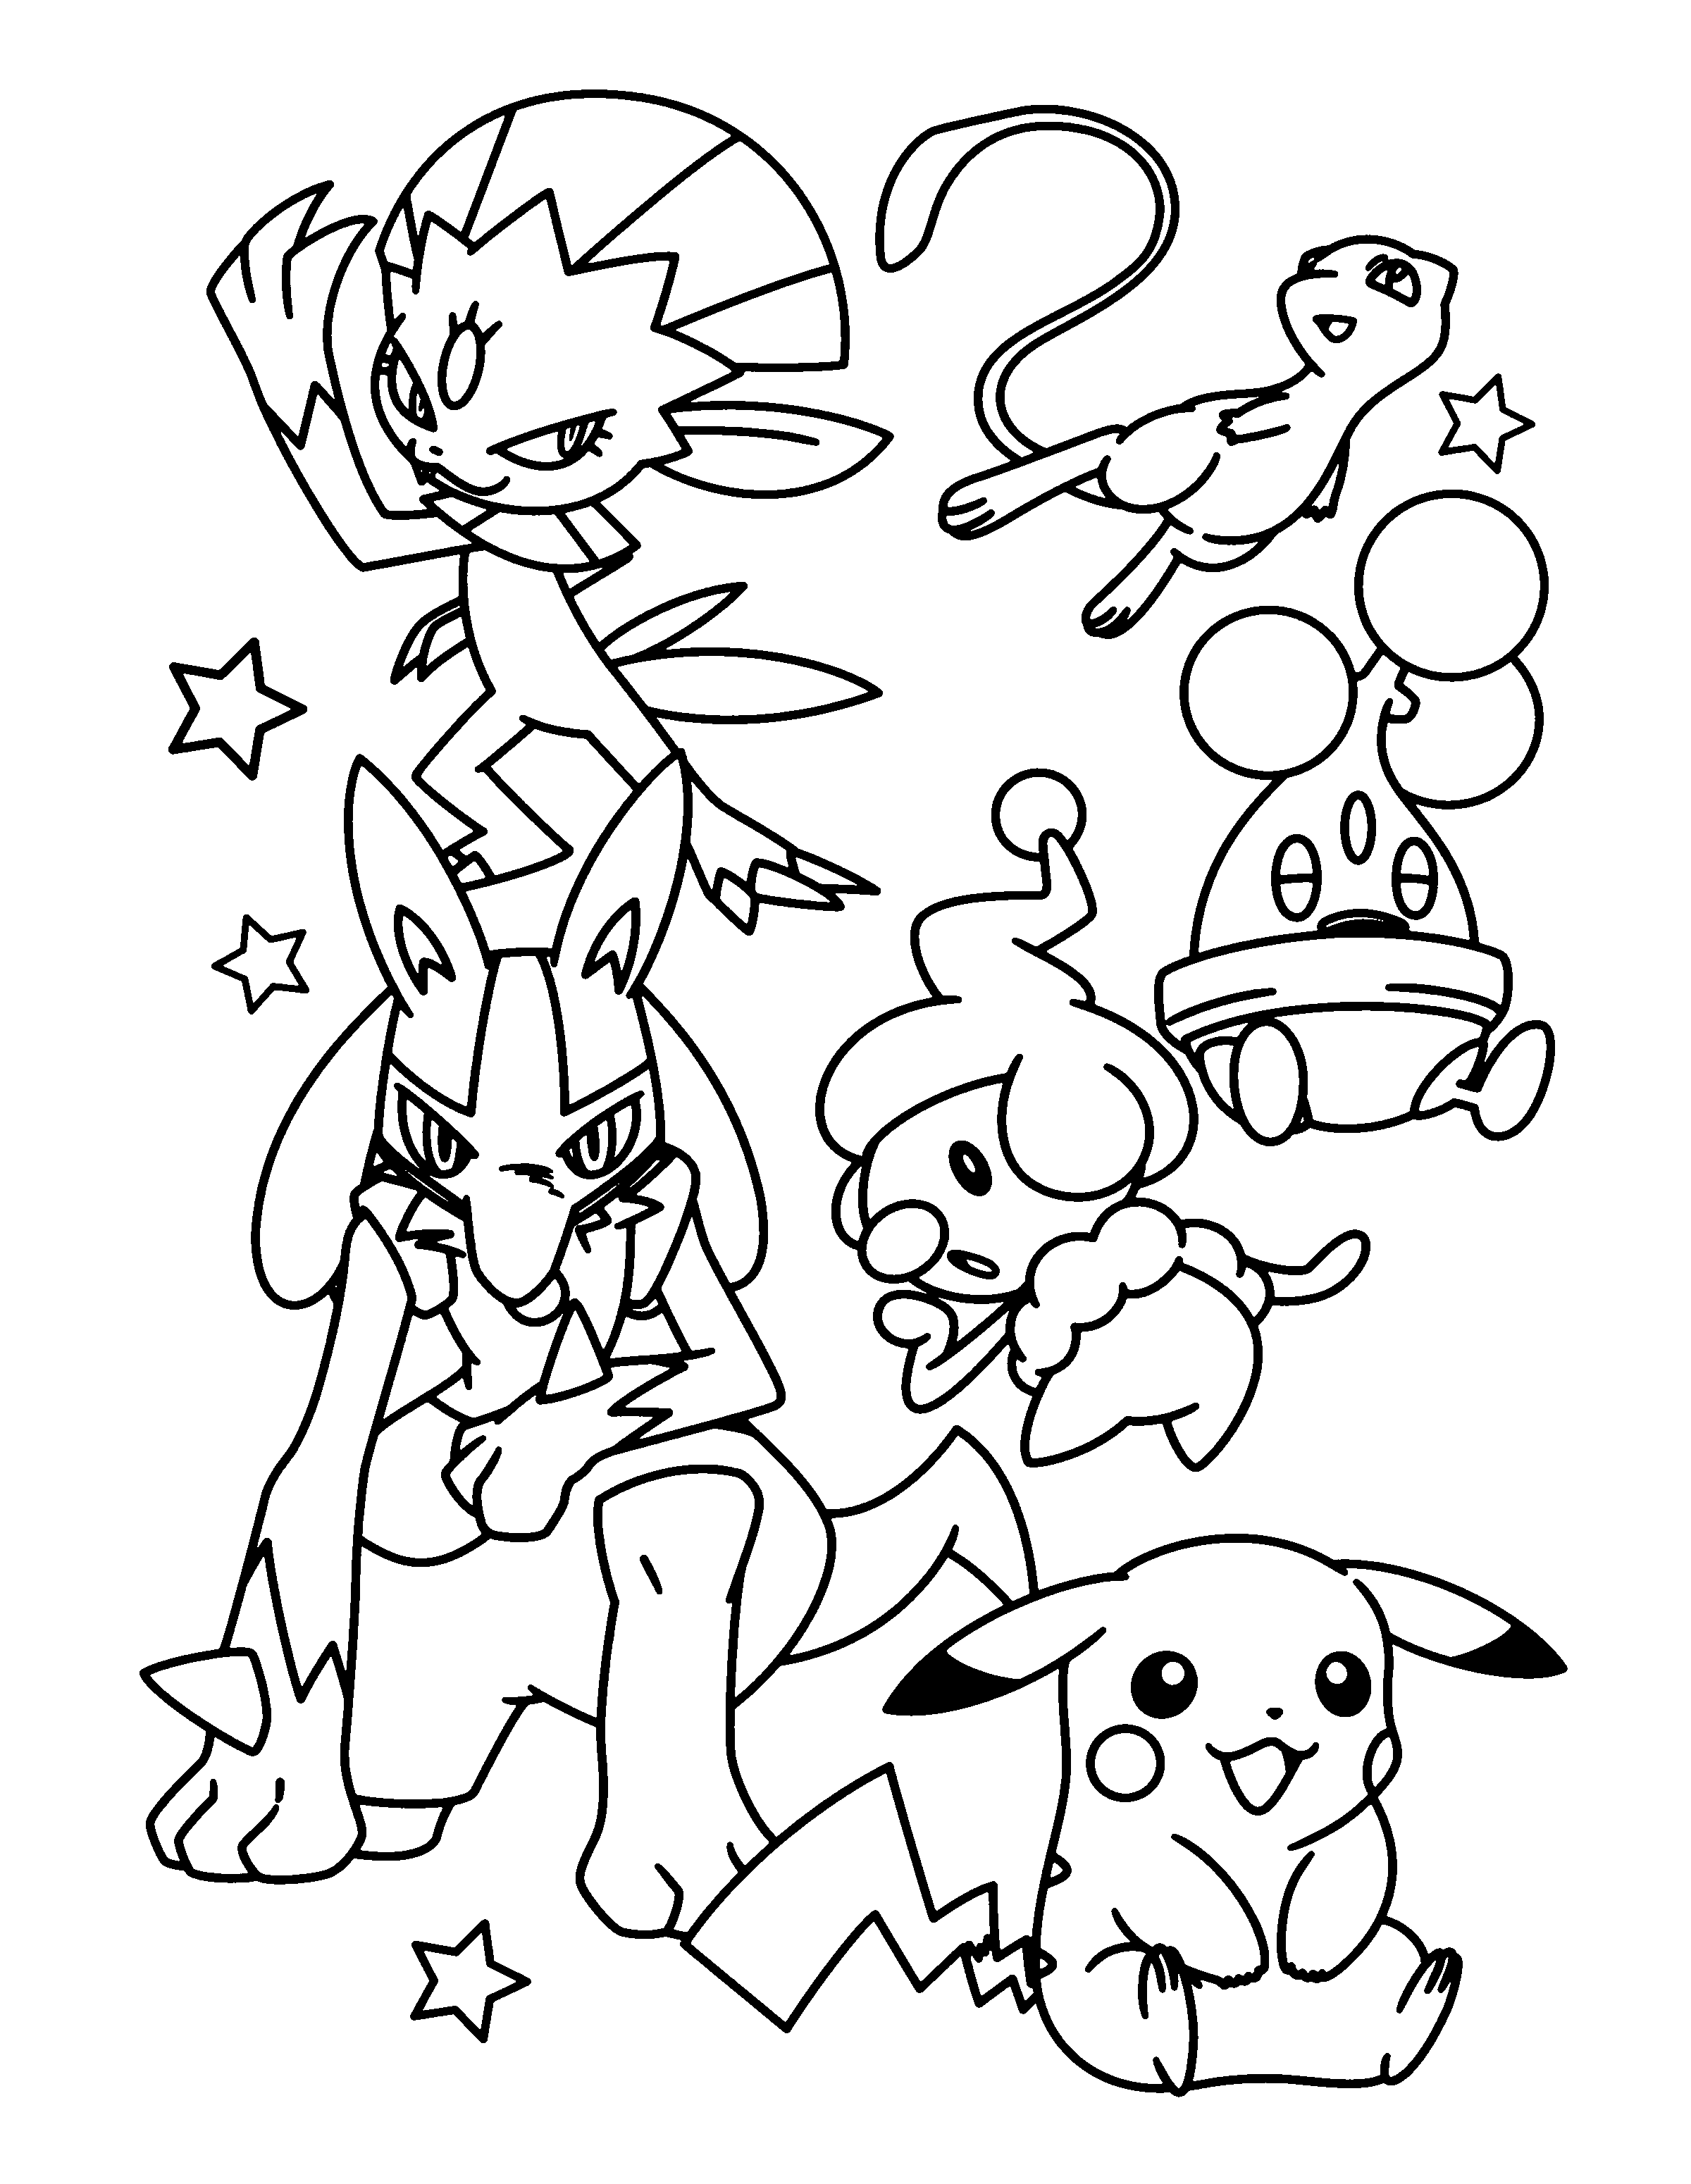 download-cute-printable-pokemon-coloring-pages-images-colorist